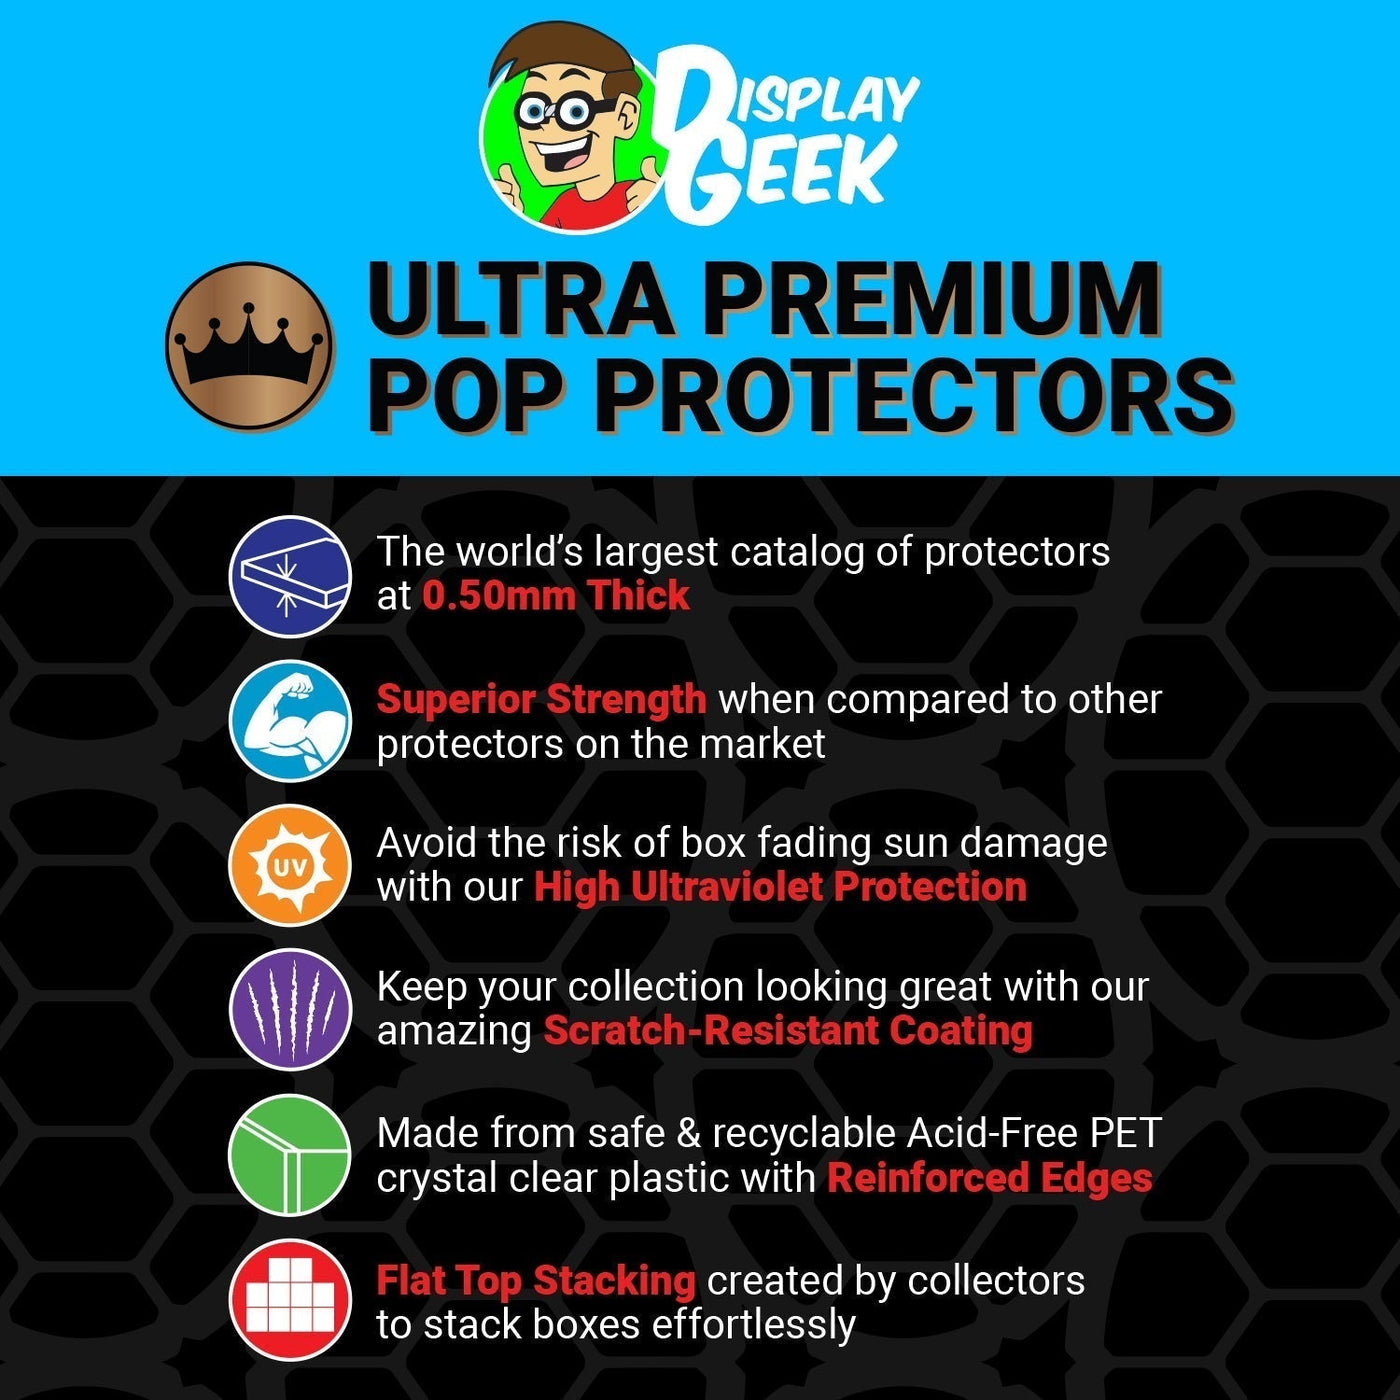 Pop Protector for Mr. Meeseeks FunkO's Cereal Box on The Protector Guide App by Display Geek